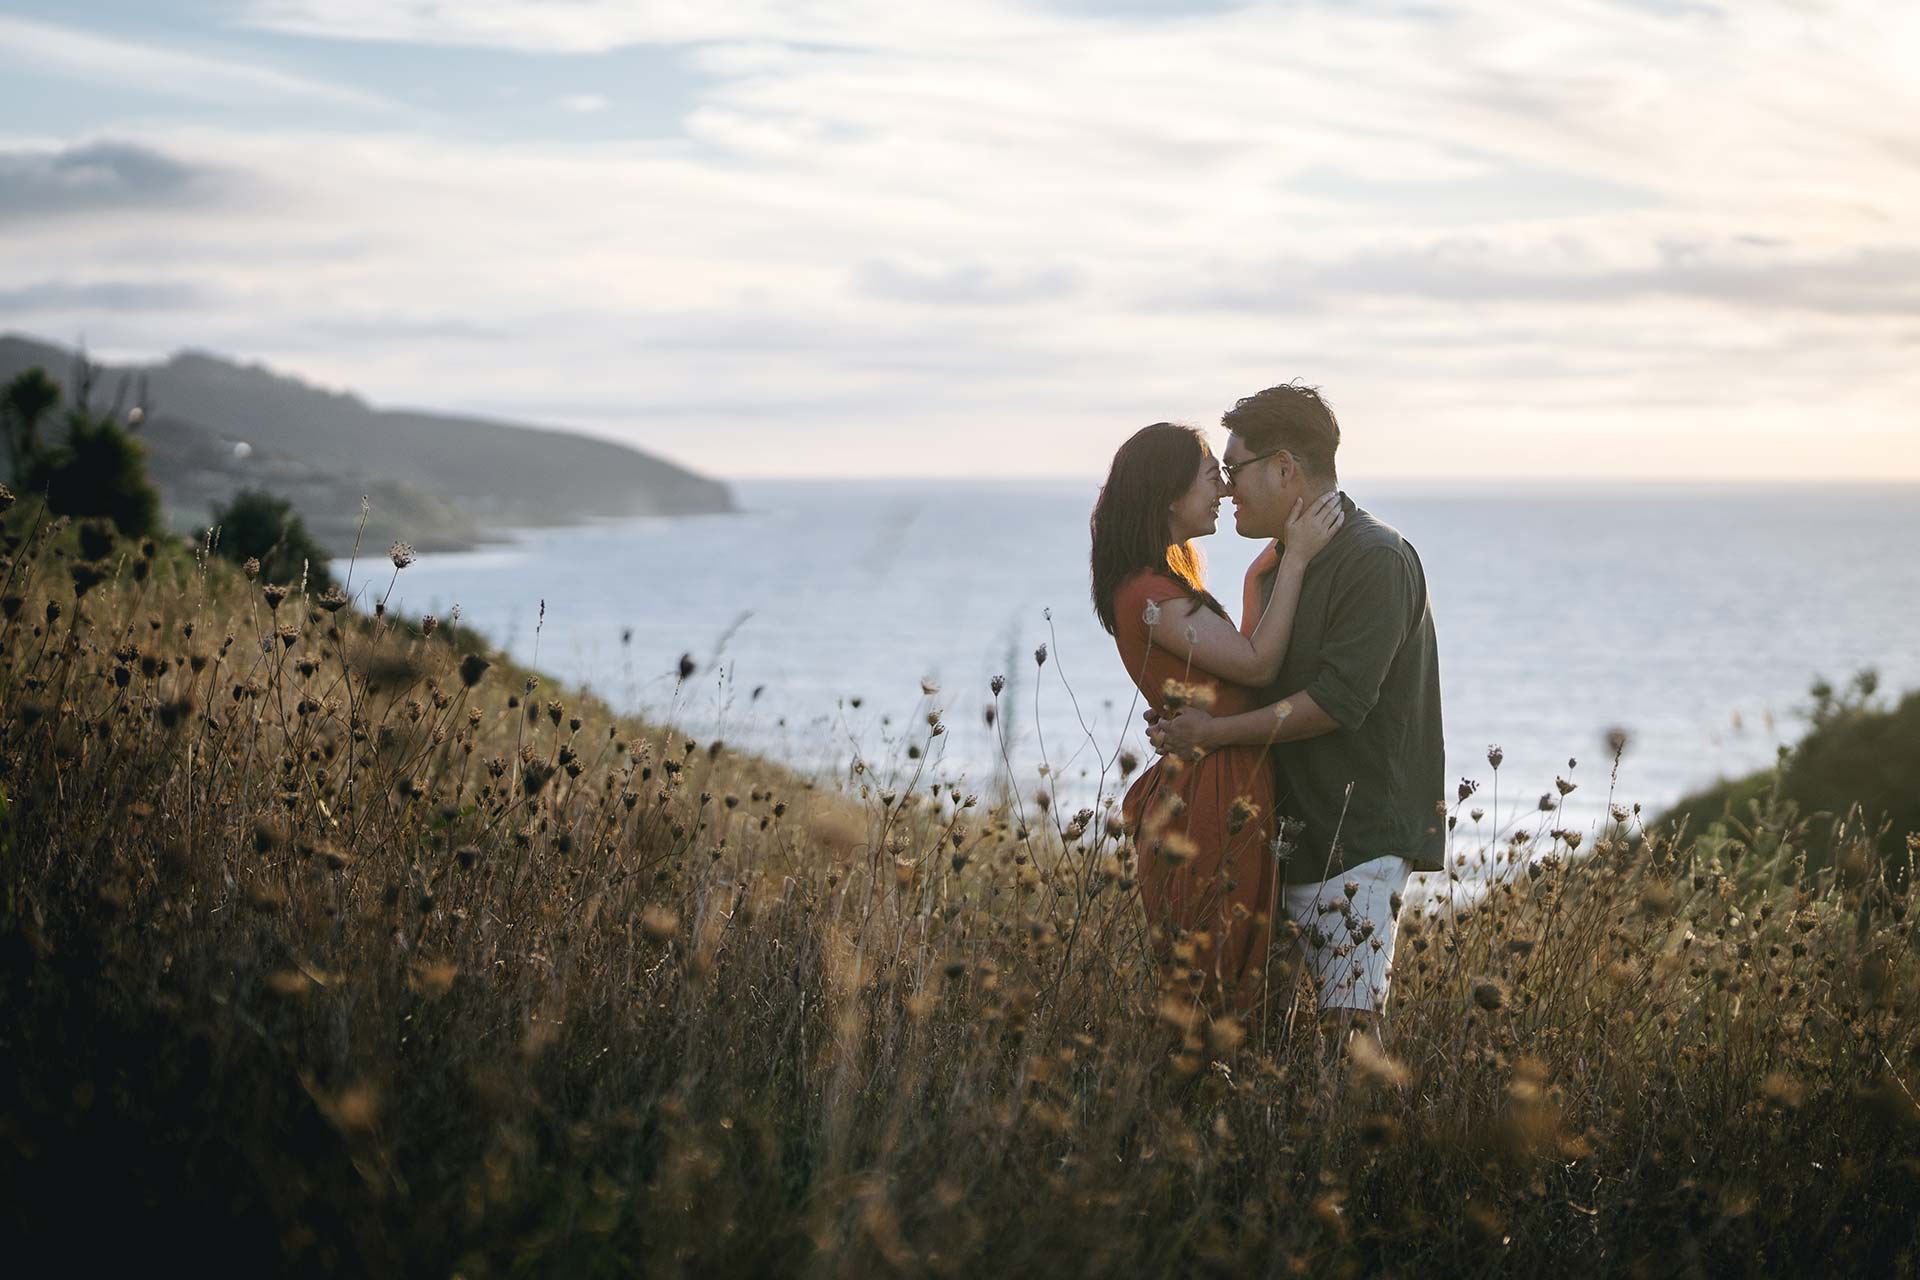 Dressing for Success: What to Wear to Your Dreamy Raglan Engagement Shoot